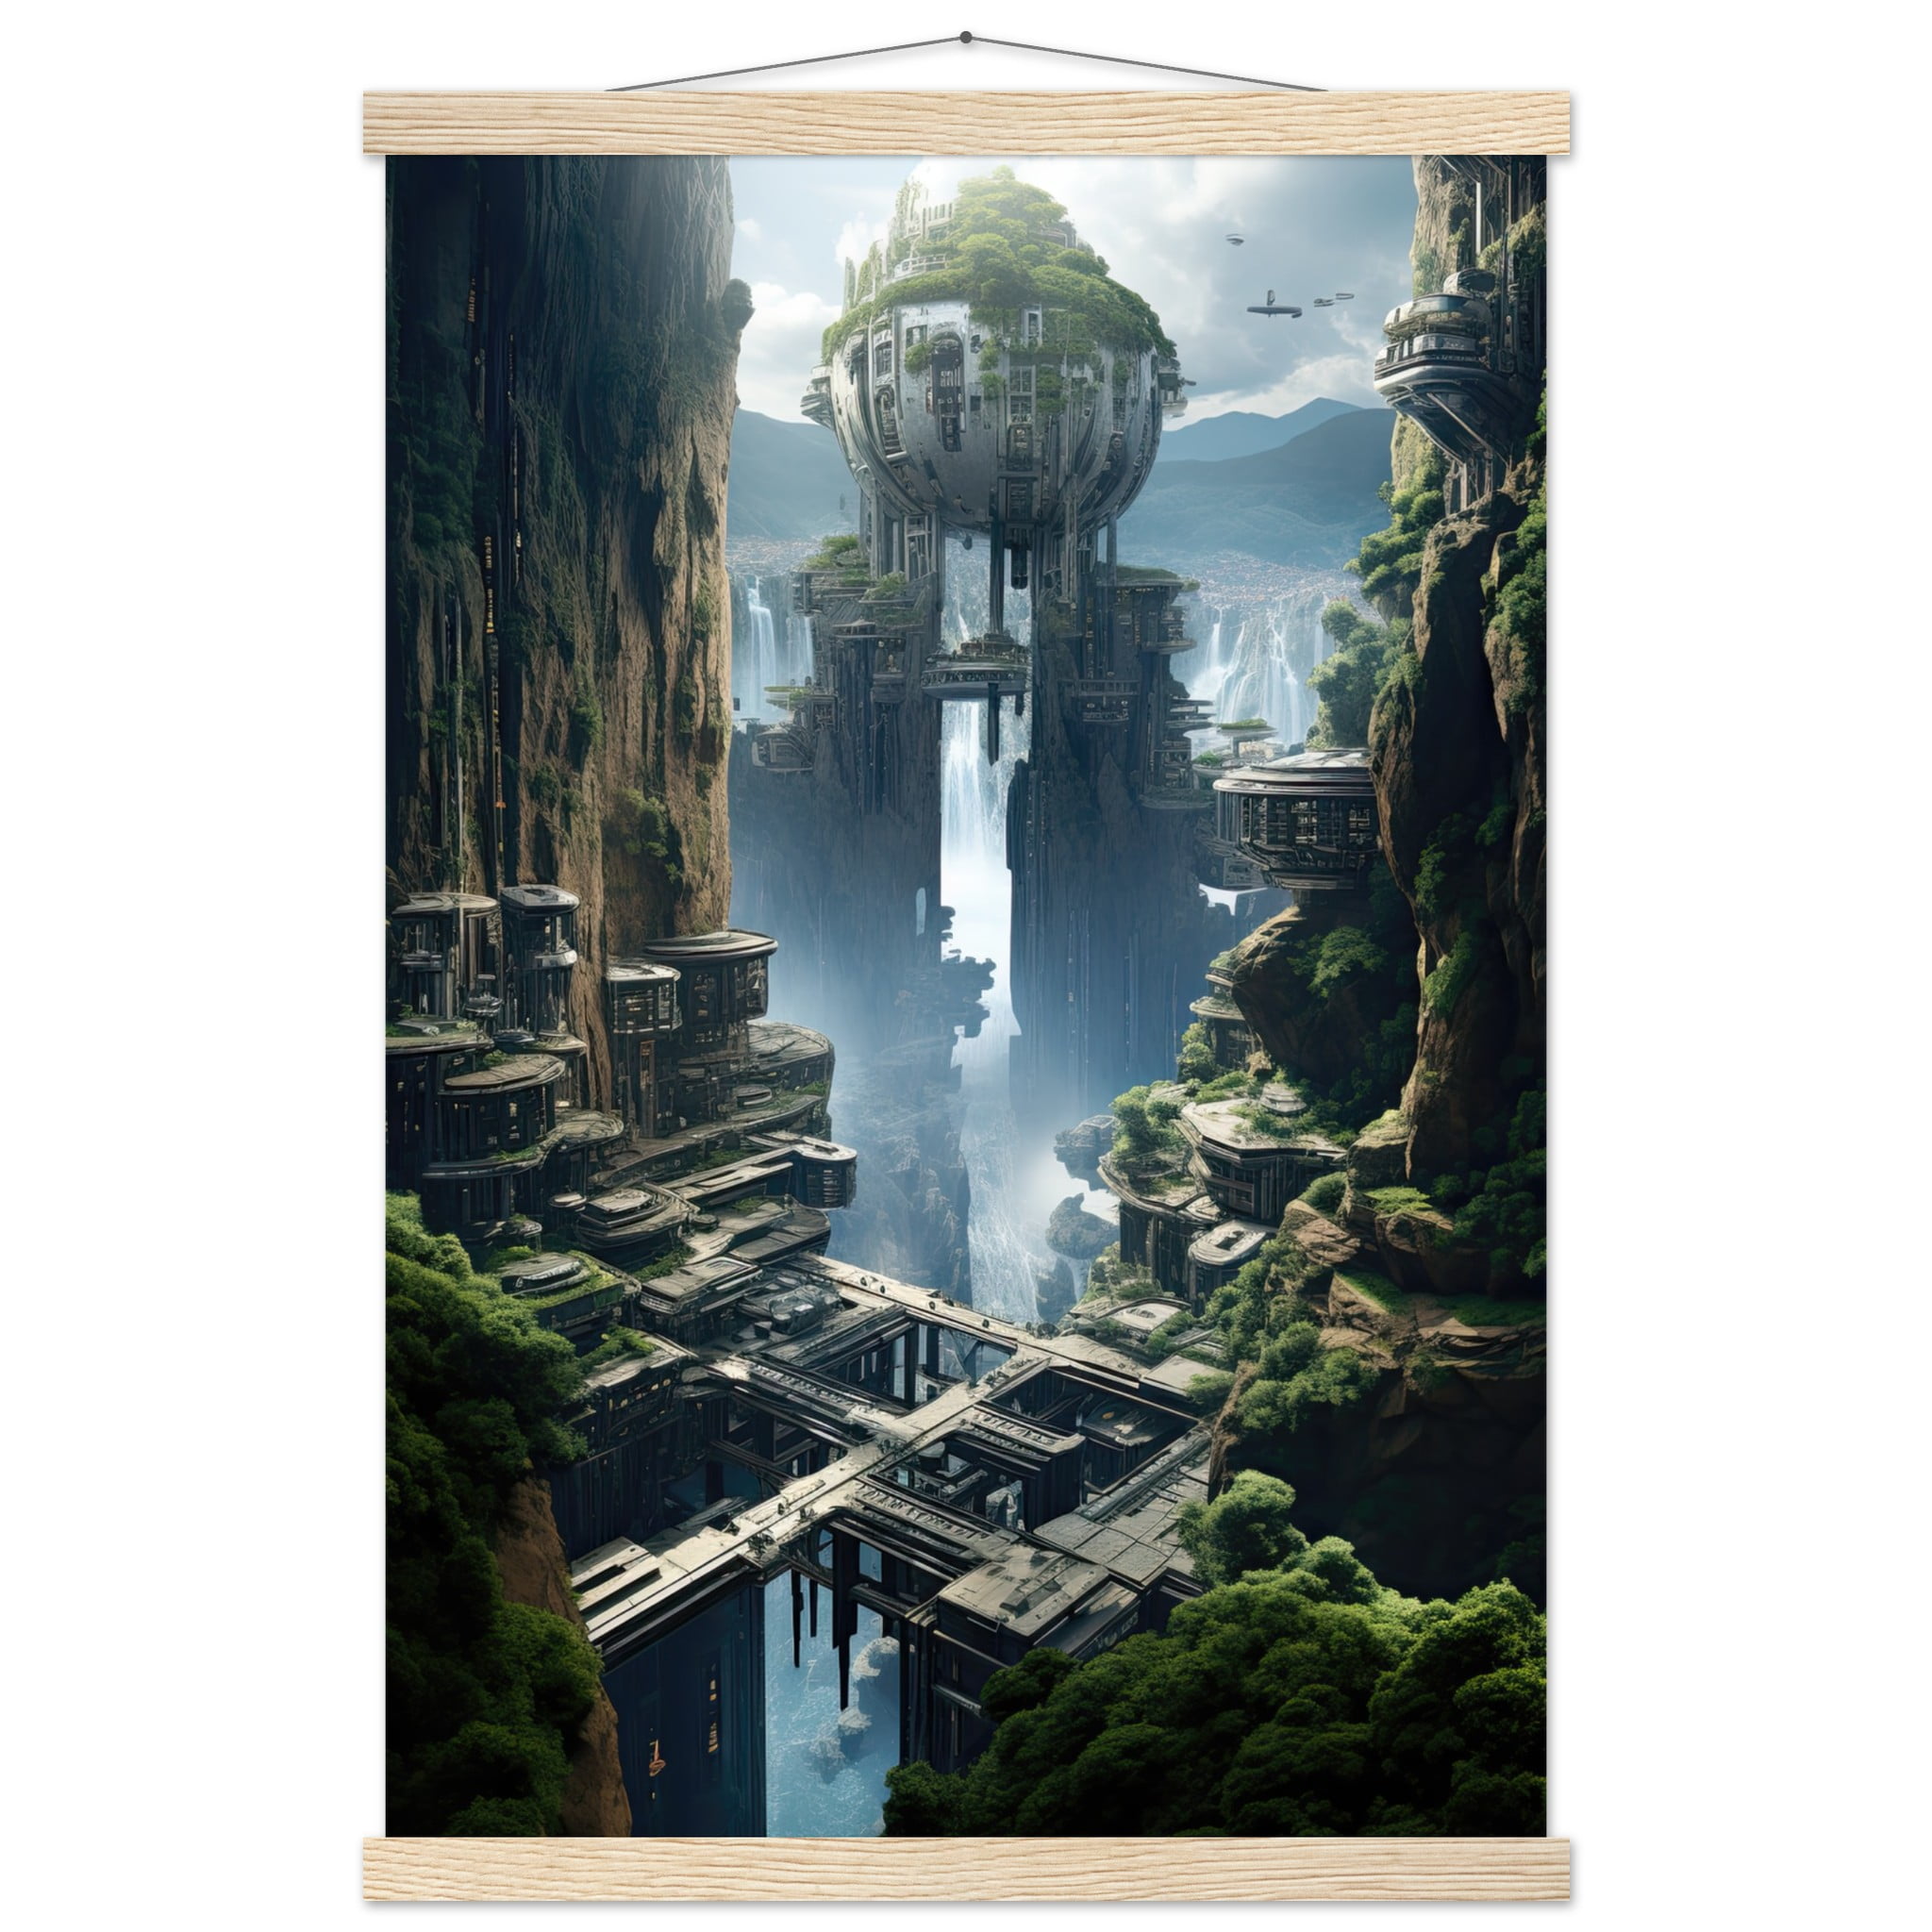 Sci-Fi Concept Art Print with Hanger – 40×60 cm / 16×24″, Natural wood wall hanger